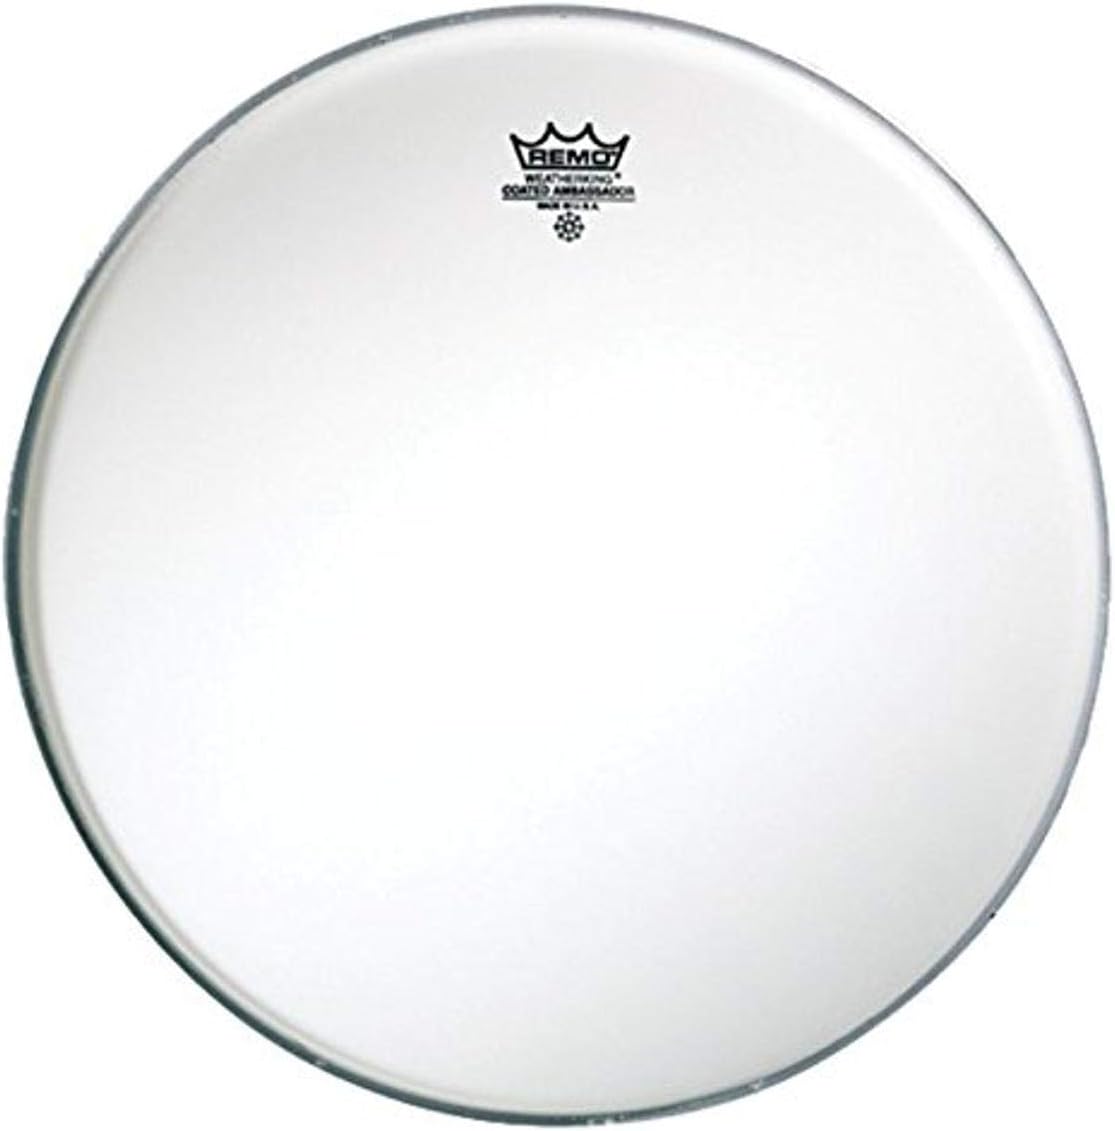 Remo BD-0113-00, Batter, Diplomat, Coated, Drum Head, 13 inch